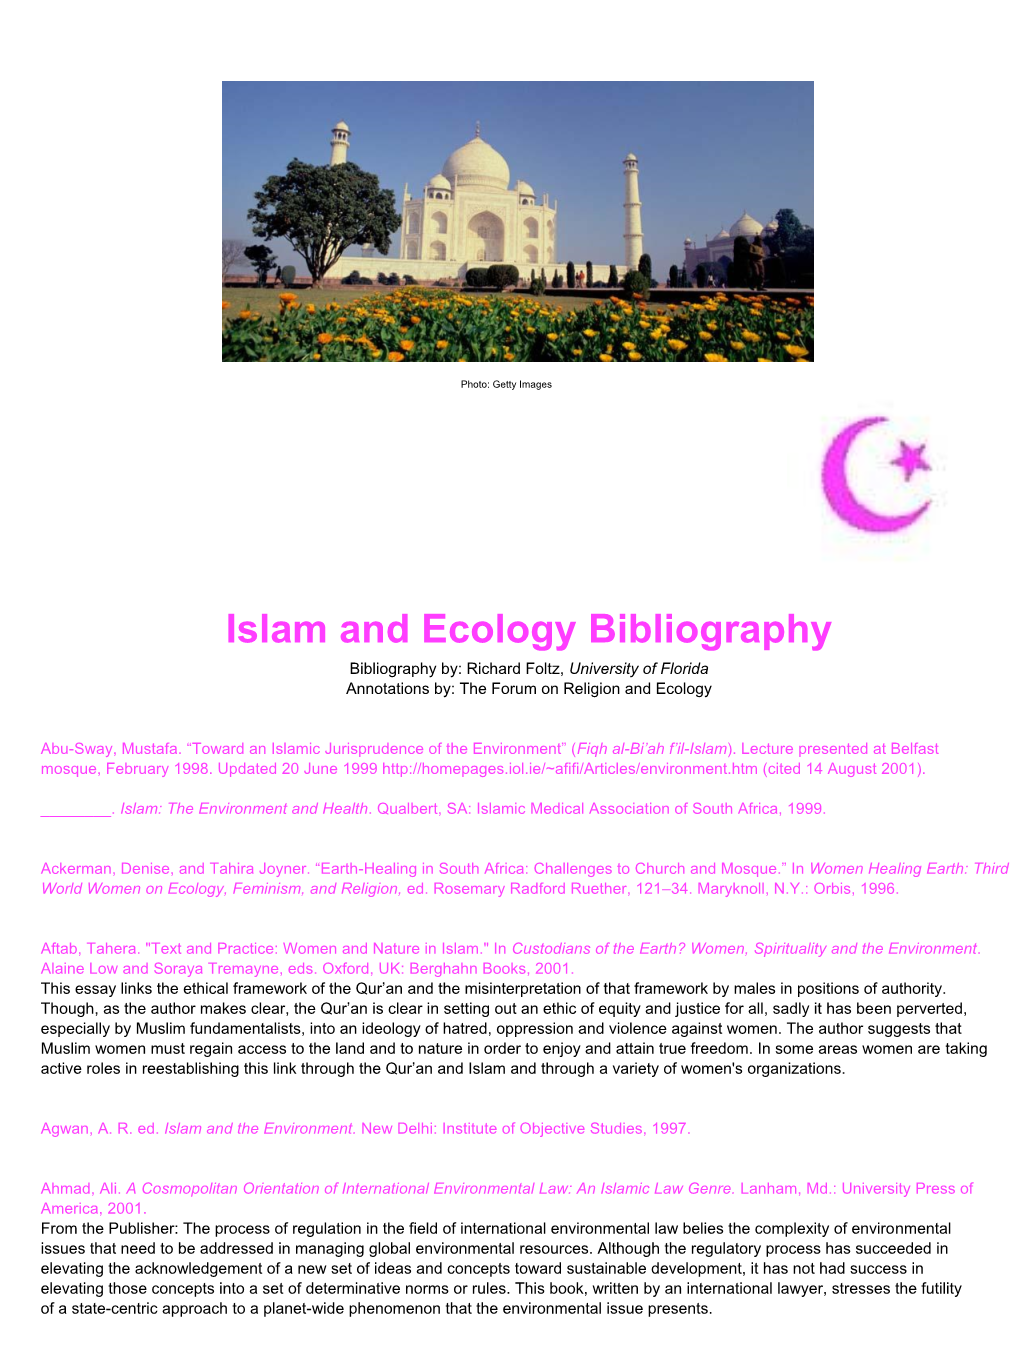 Islam and Ecology Bibliography Bibliography By: Richard Foltz, University of Florida Annotations By: the Forum on Religion and Ecology